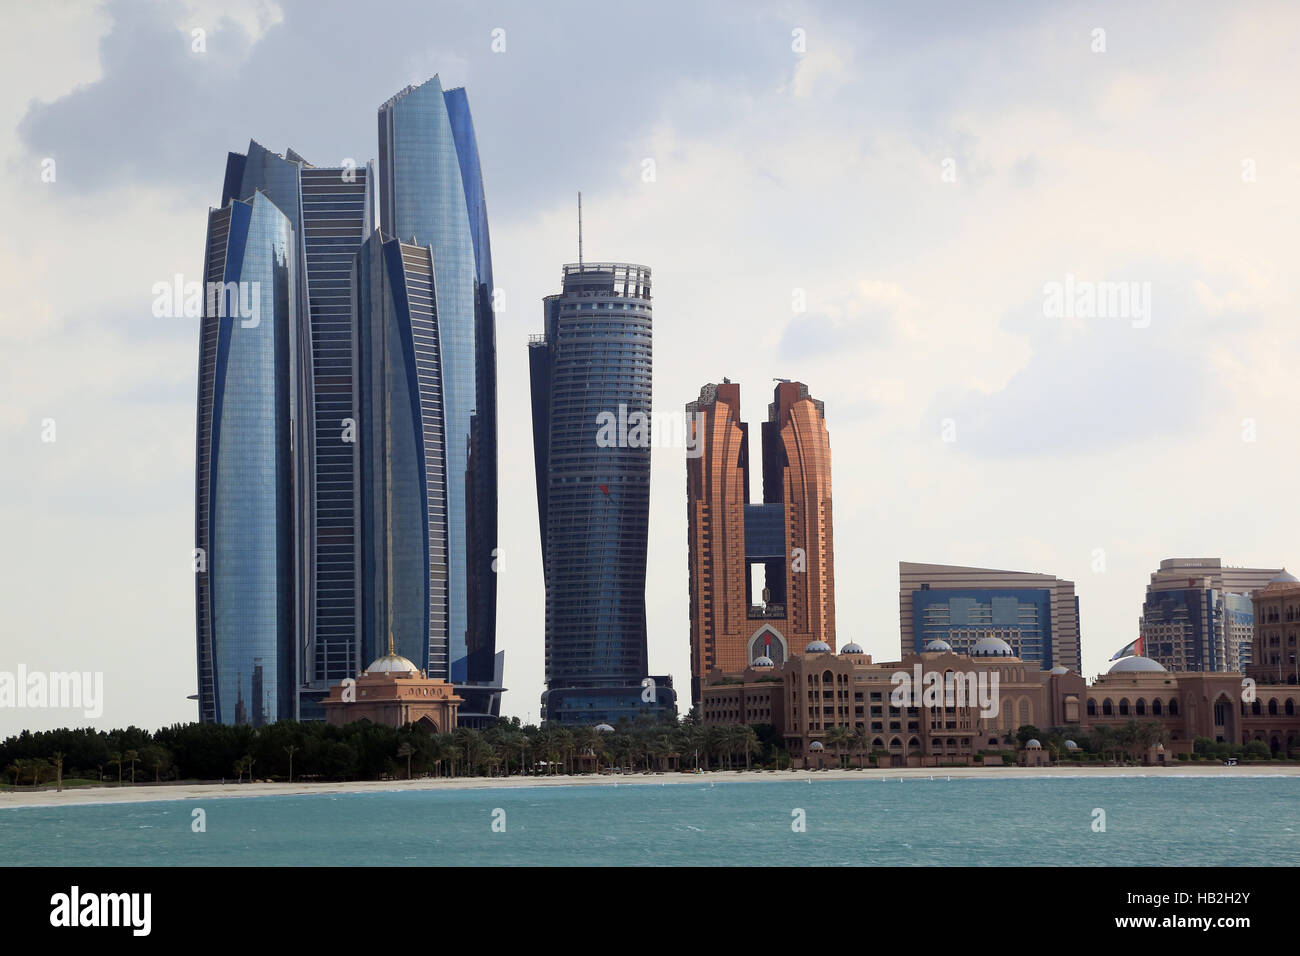 Ethiad Towers and skyscrapers in Abu Dhabi Stock Photo